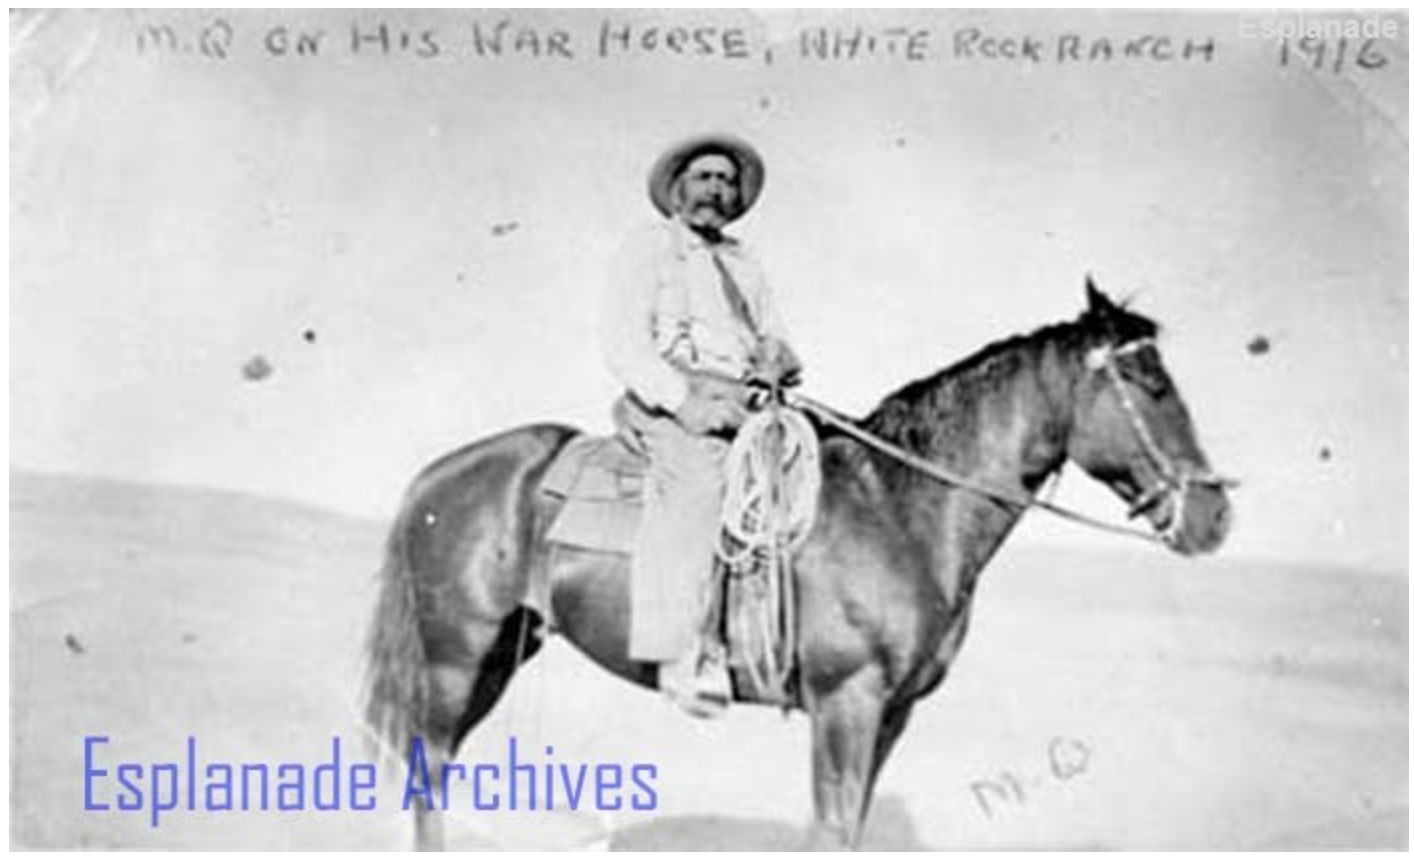 This is my Great, Great, Grandpa, Michael Quesnelle on horseback on White Rock Ranch. Photo courtesy of the Esplanade Archives.